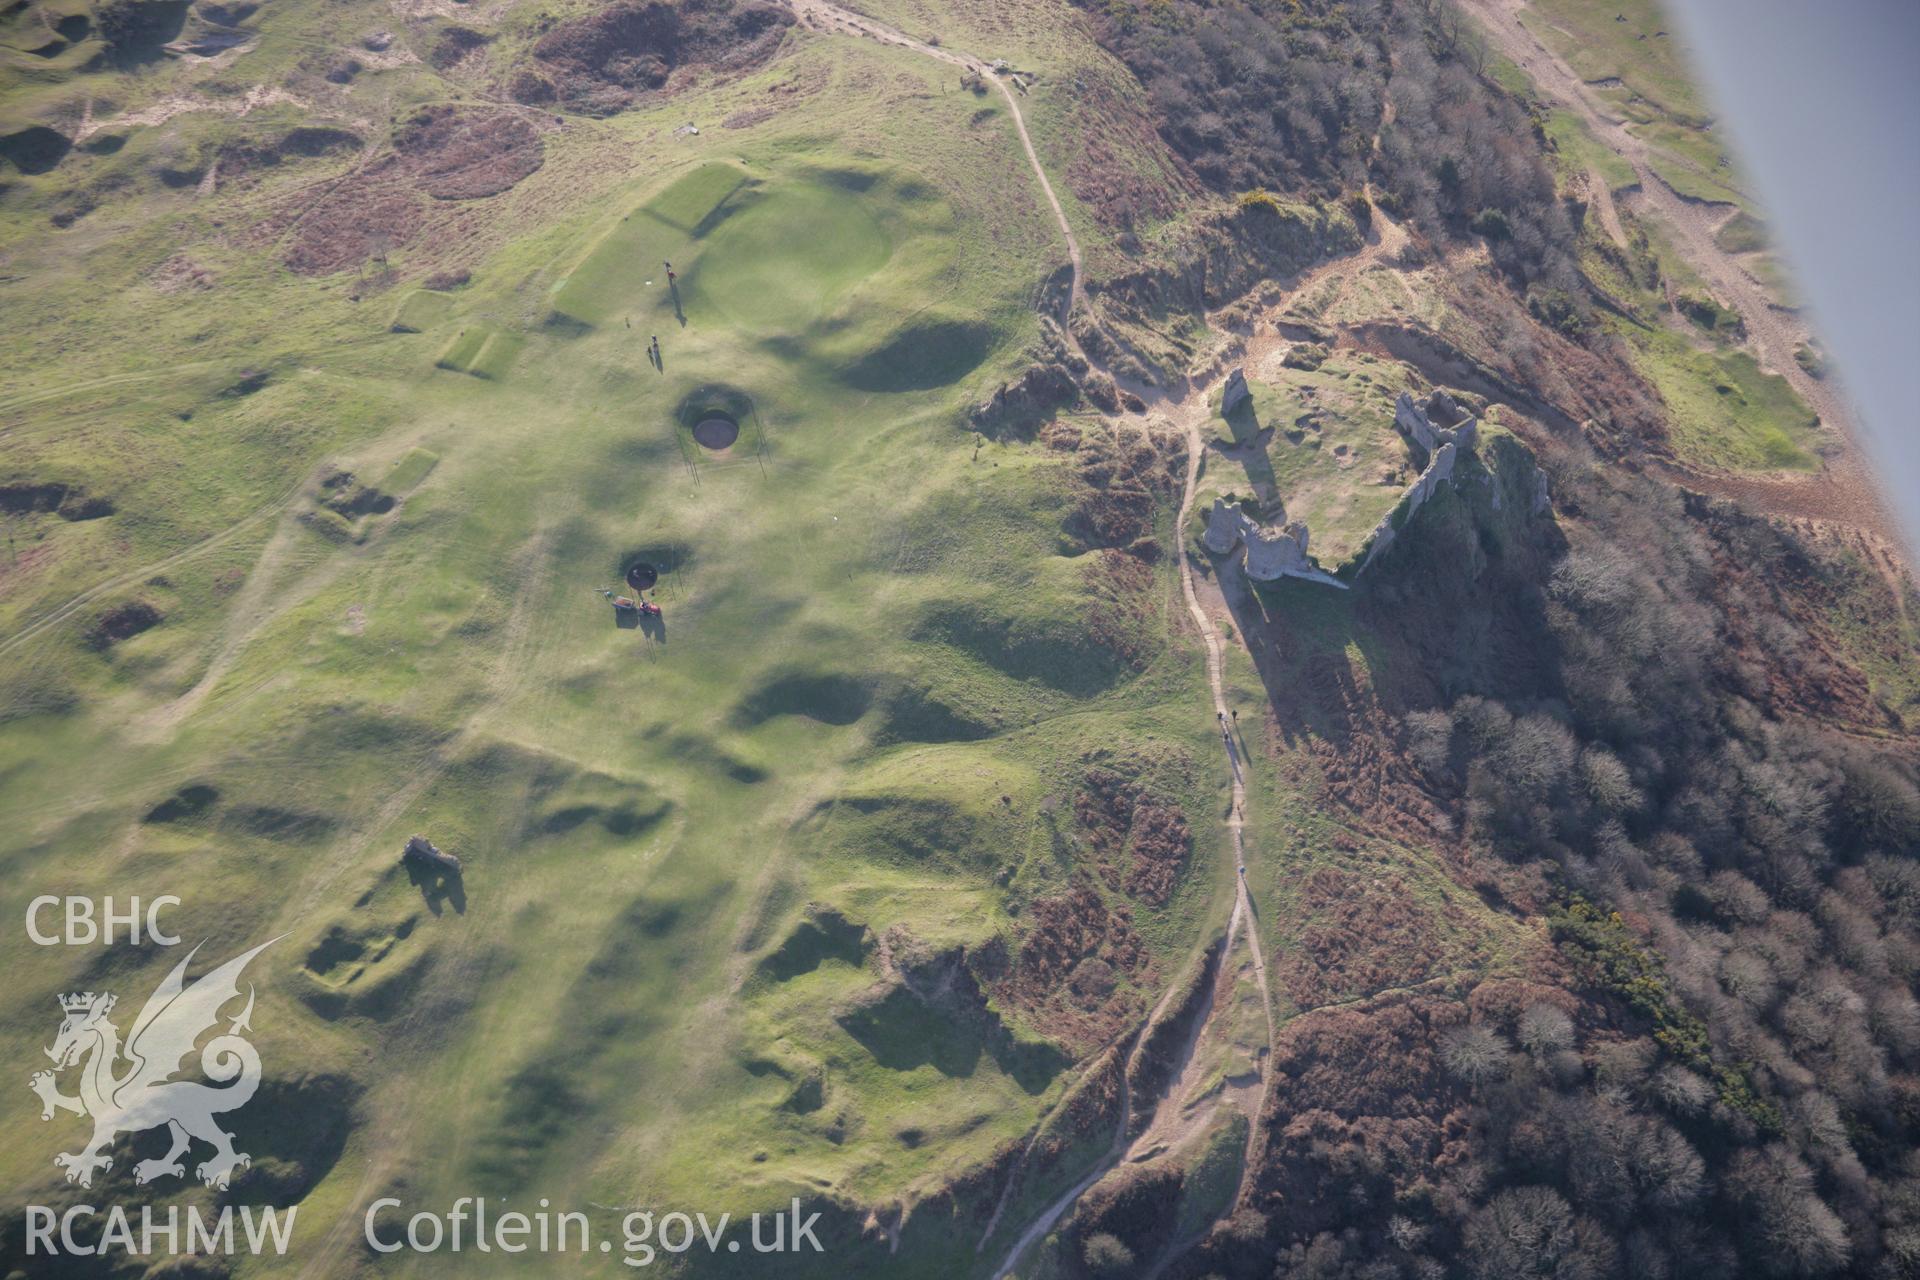 RCAHMW colour oblique aerial photograph of St Mary's Church, Pennard, from the north. Taken on 26 January 2006 by Toby Driver.